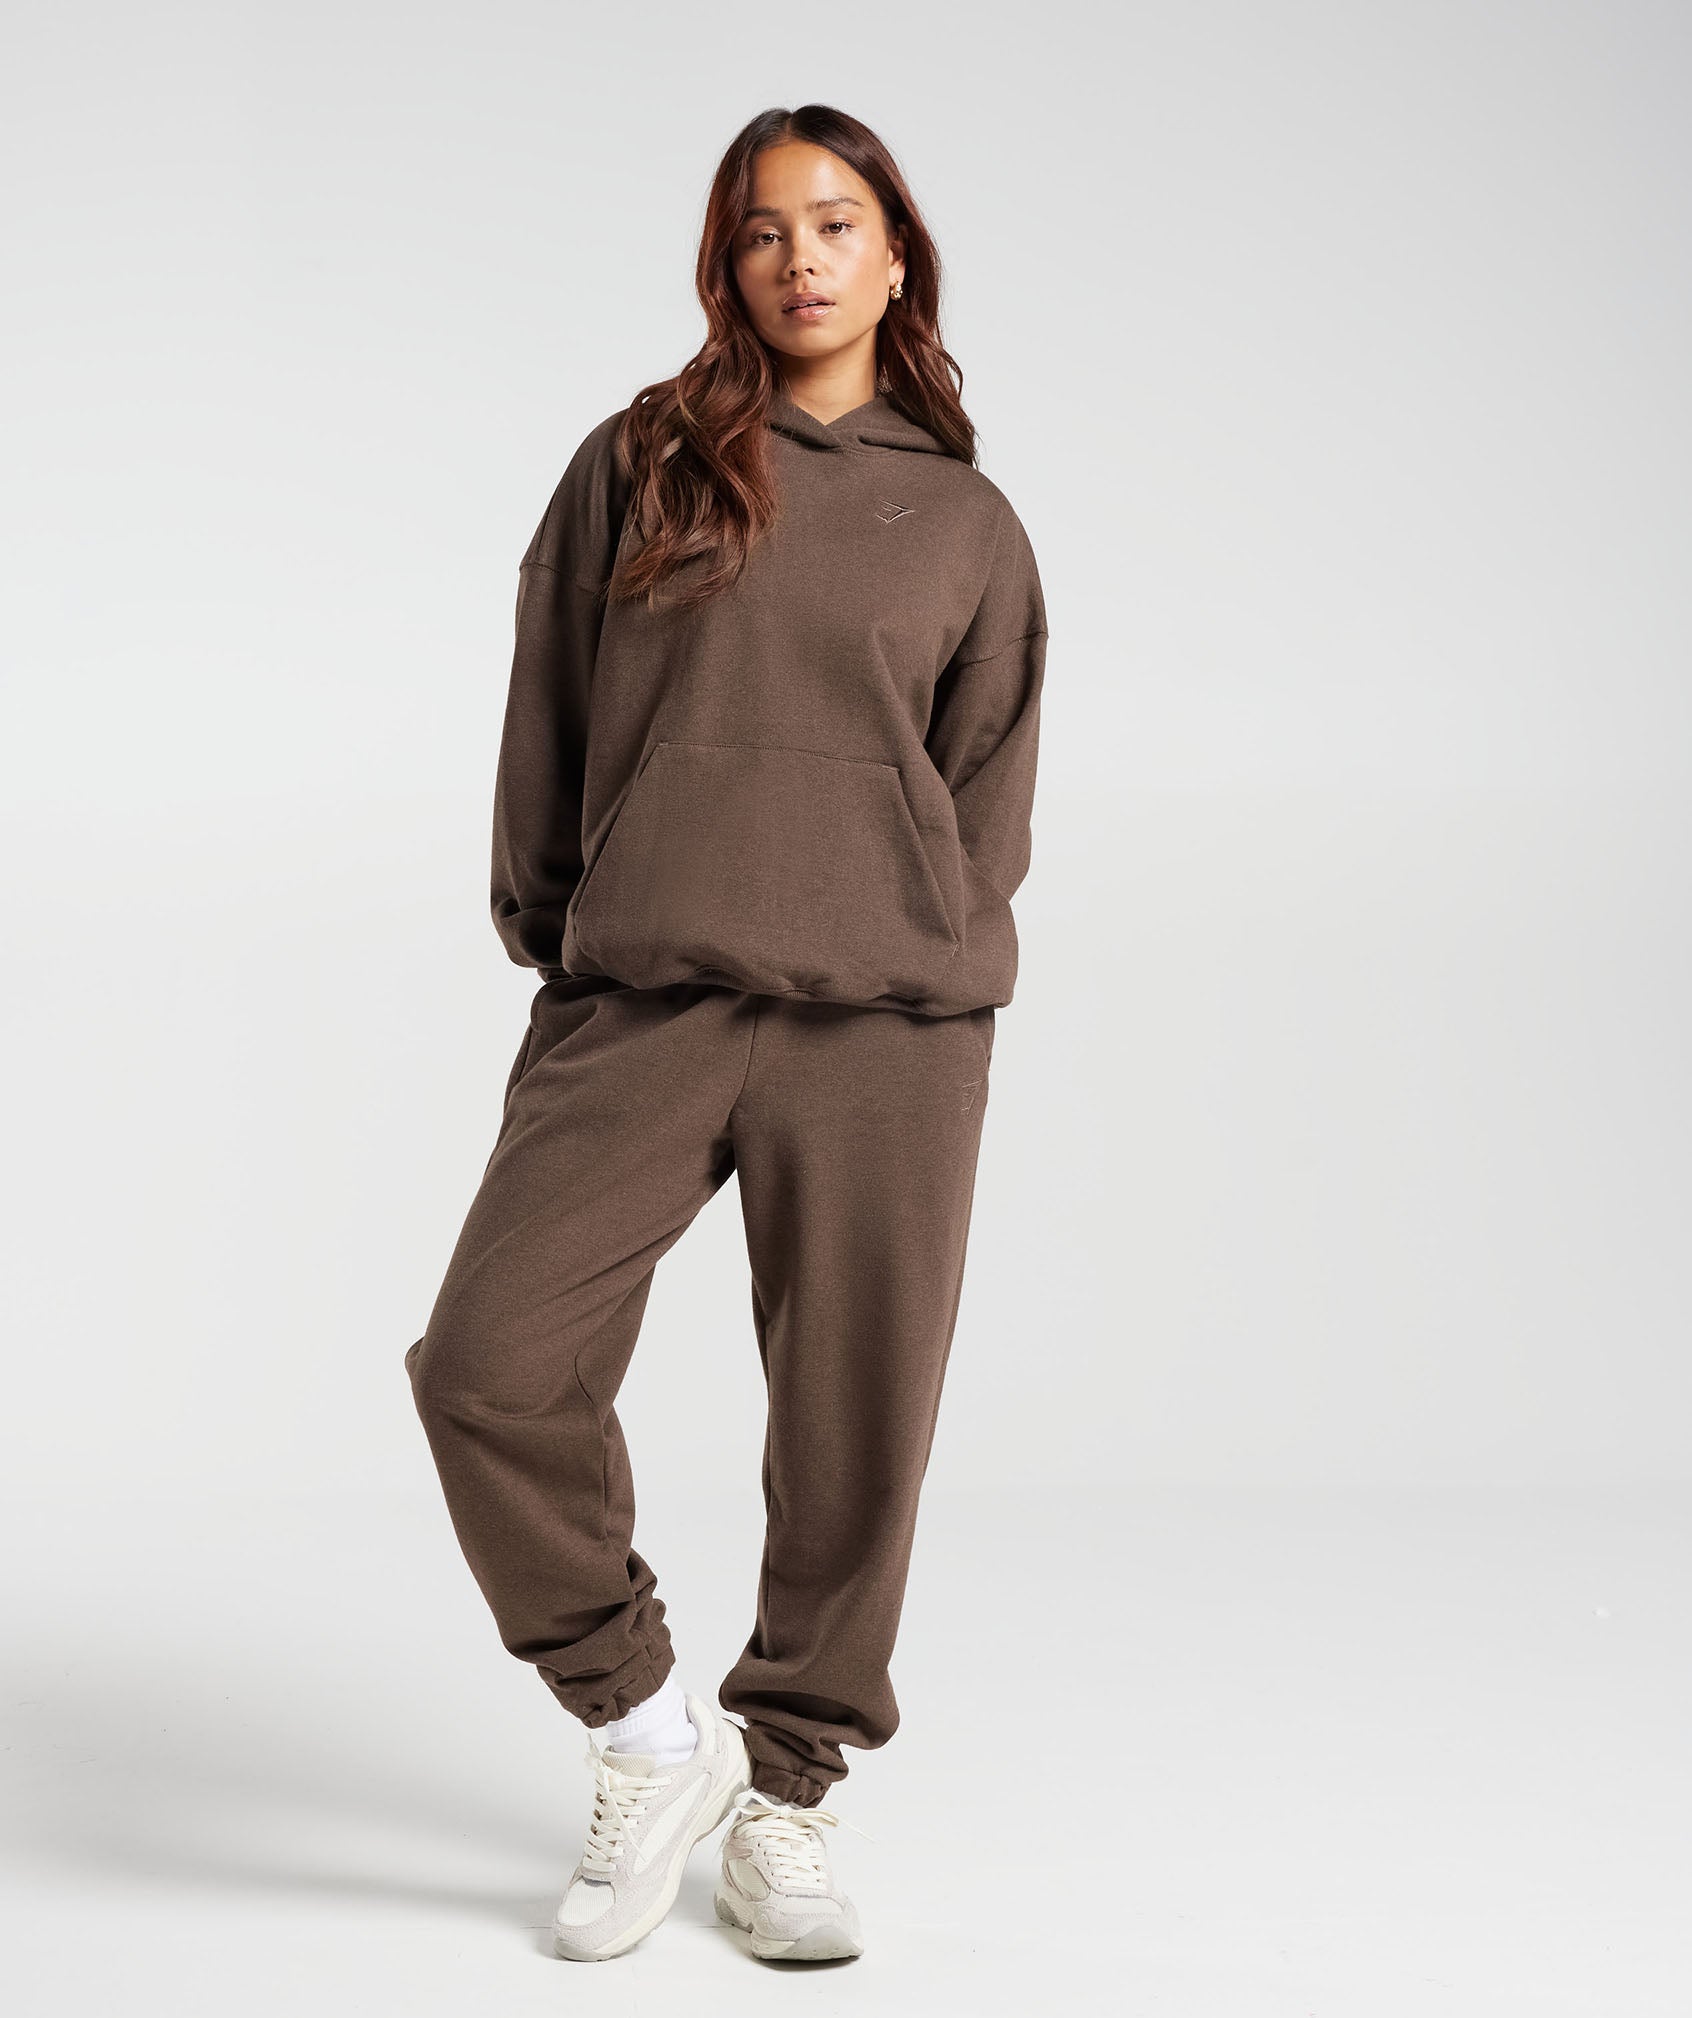 Rest Day Sweats Hoodie in Cozy Brown Marl - view 4